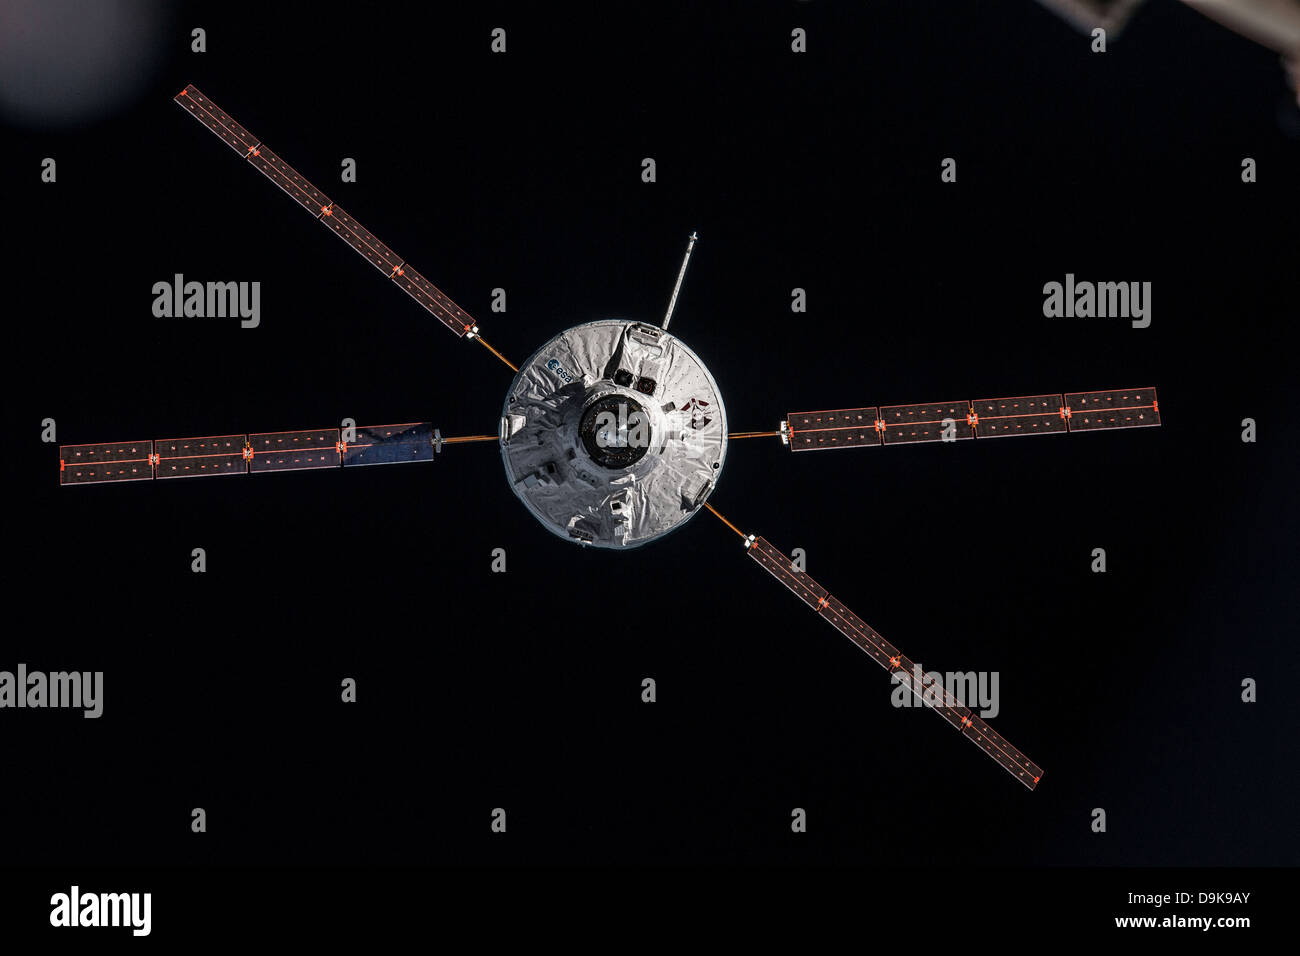 European Space Agency supply and support ferry the Automated Transfer Vehicle called Albert Einstein approaches the International Space Station to dock June 15, 2013 in earth orbit. ATV Albert Einstein brought 7 tones of supplies, propellants and experiments to the complex. Stock Photo